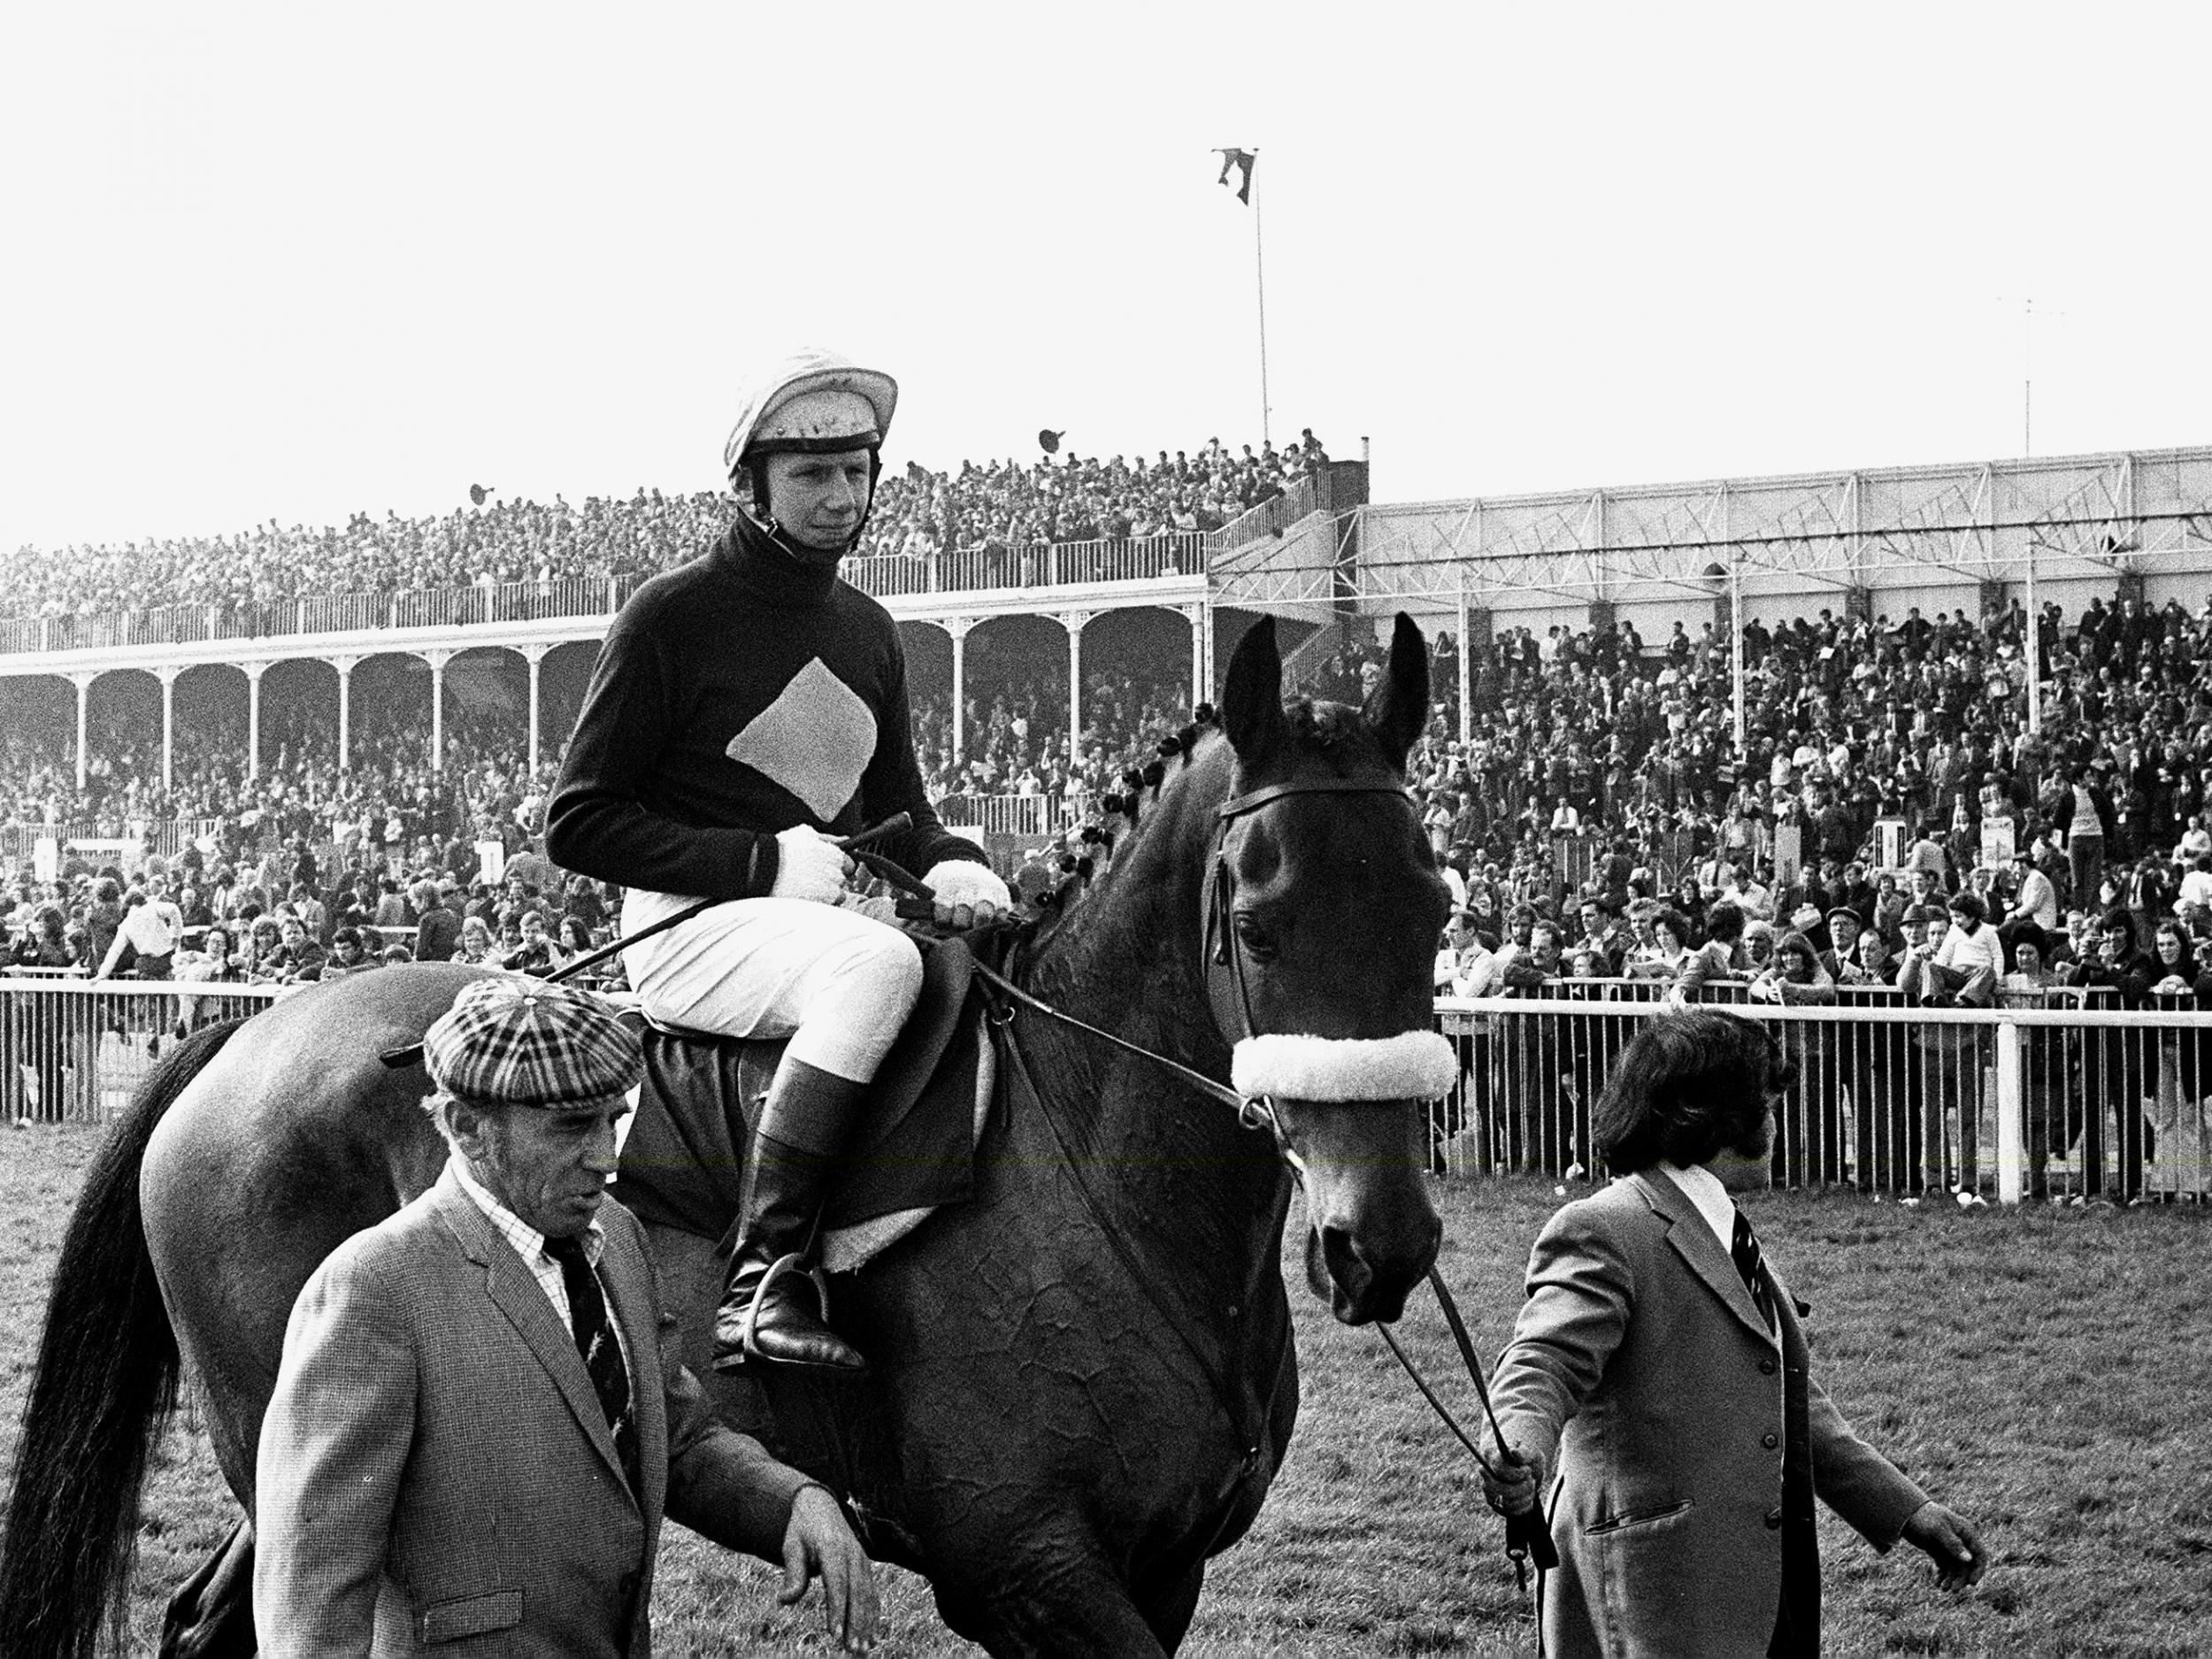 Red Rum achieved an unmatched treble when he won the Grand National in 1973, 74 and 77